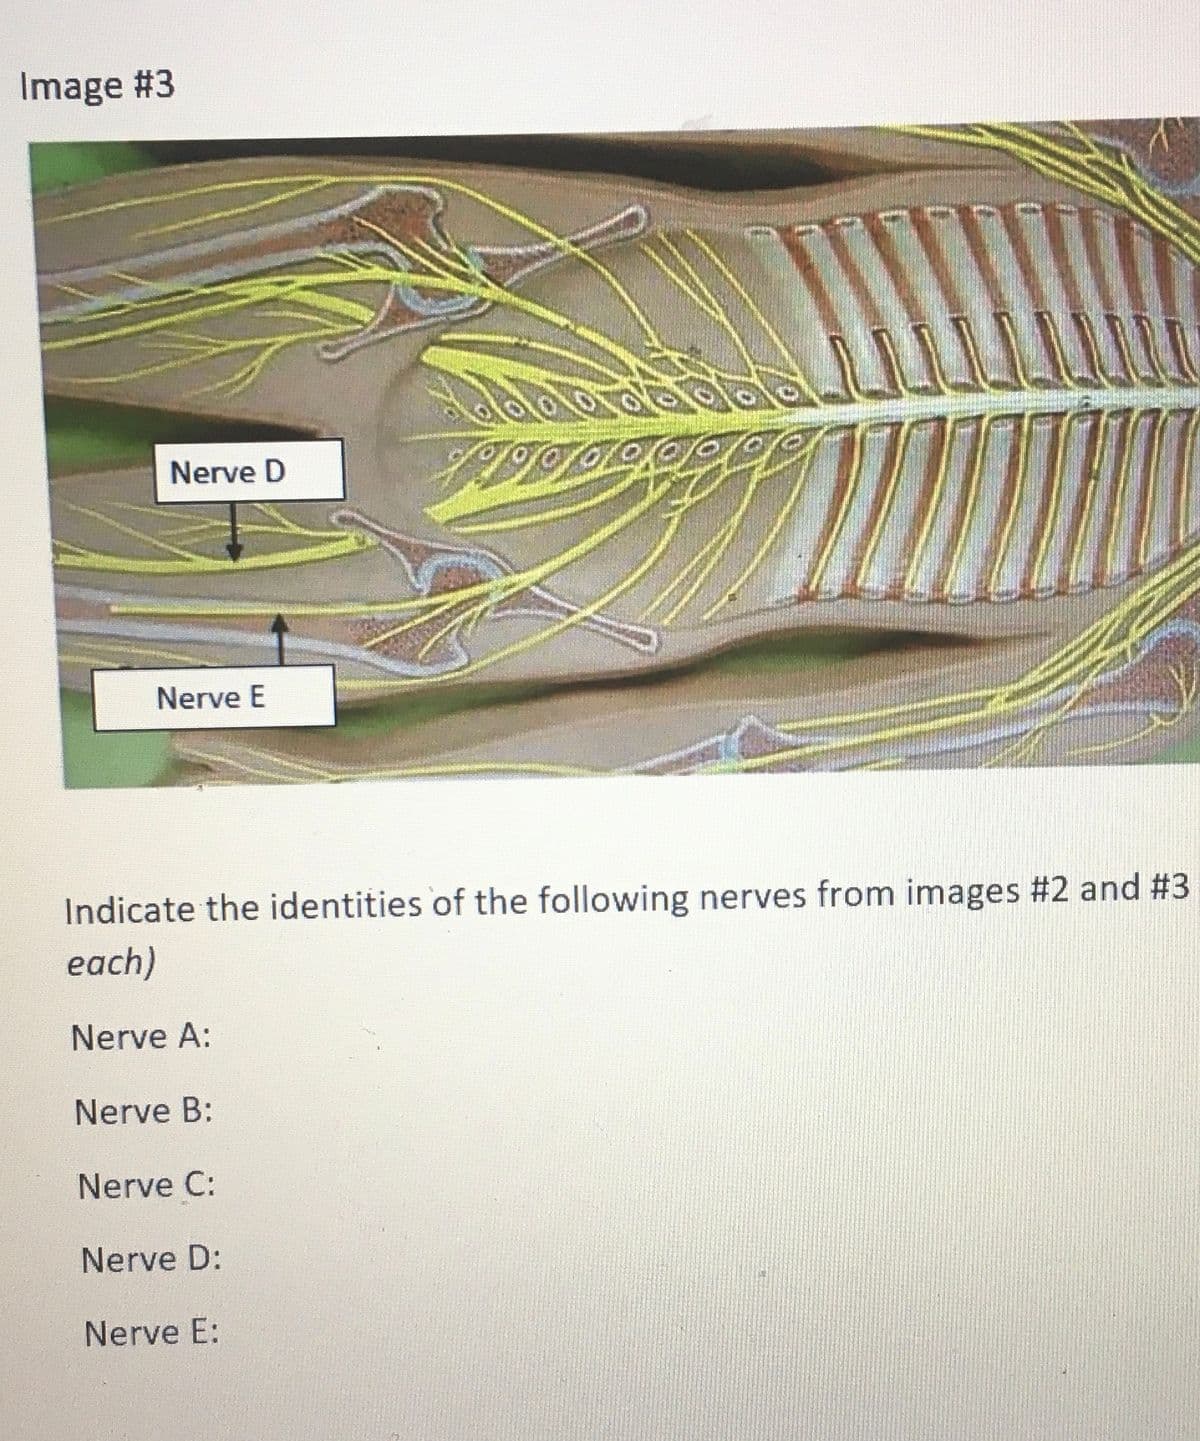 Image #3
Nerve D
Nerve E
2900
Nerve B:
Nerve C:
Nerve D:
Nerve E:
OOK
Indicate the identities of the following nerves from images #2 and #3
each)
Nerve A: